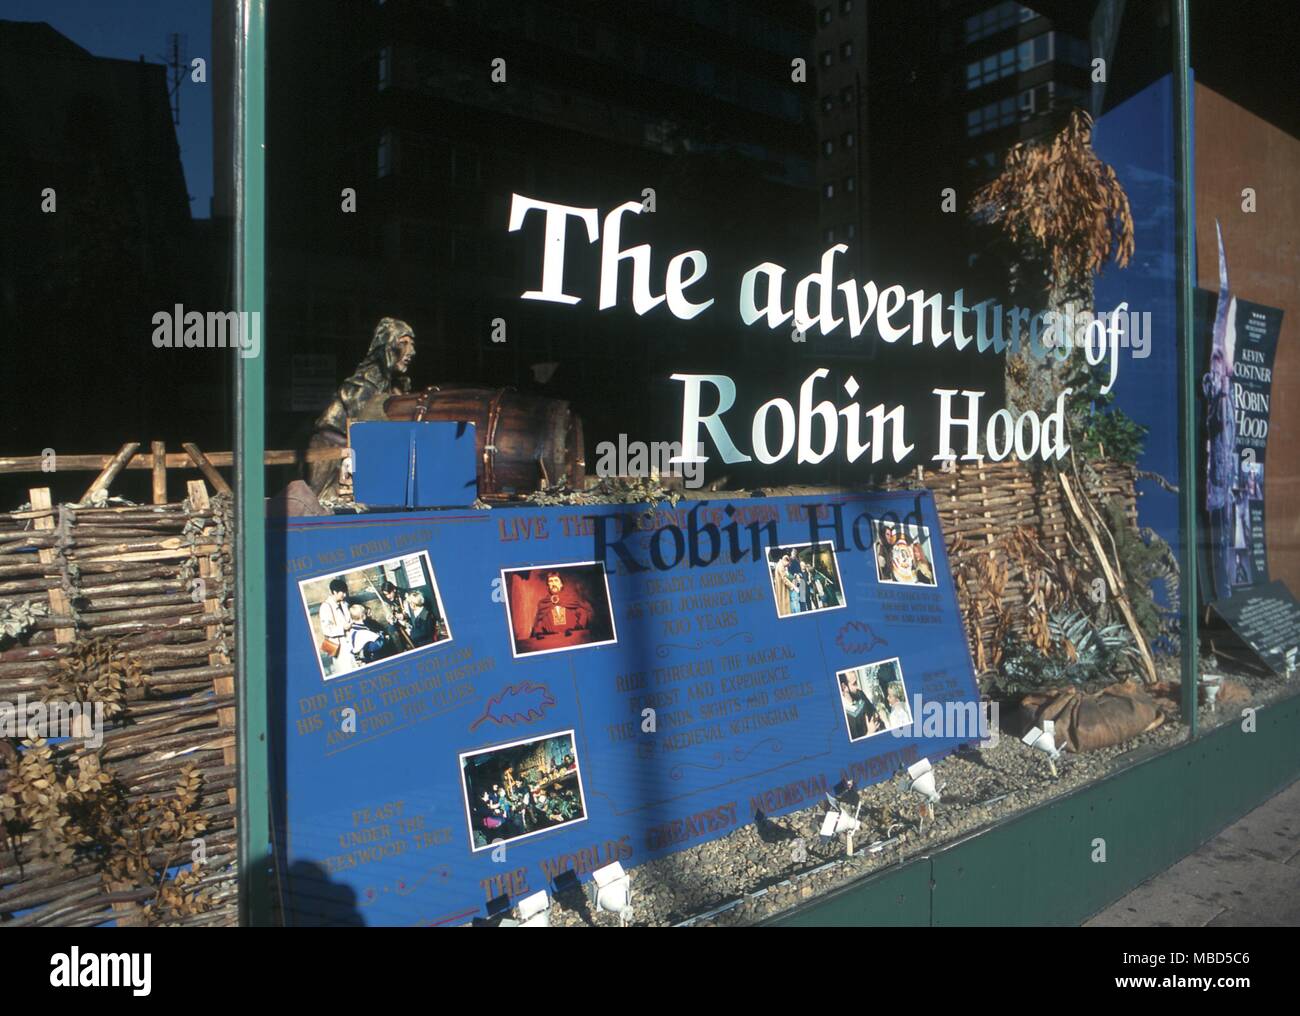 Robin Hood. Window of a modern permanent exhibition based around the adventures of Robin Hood. Stock Photo